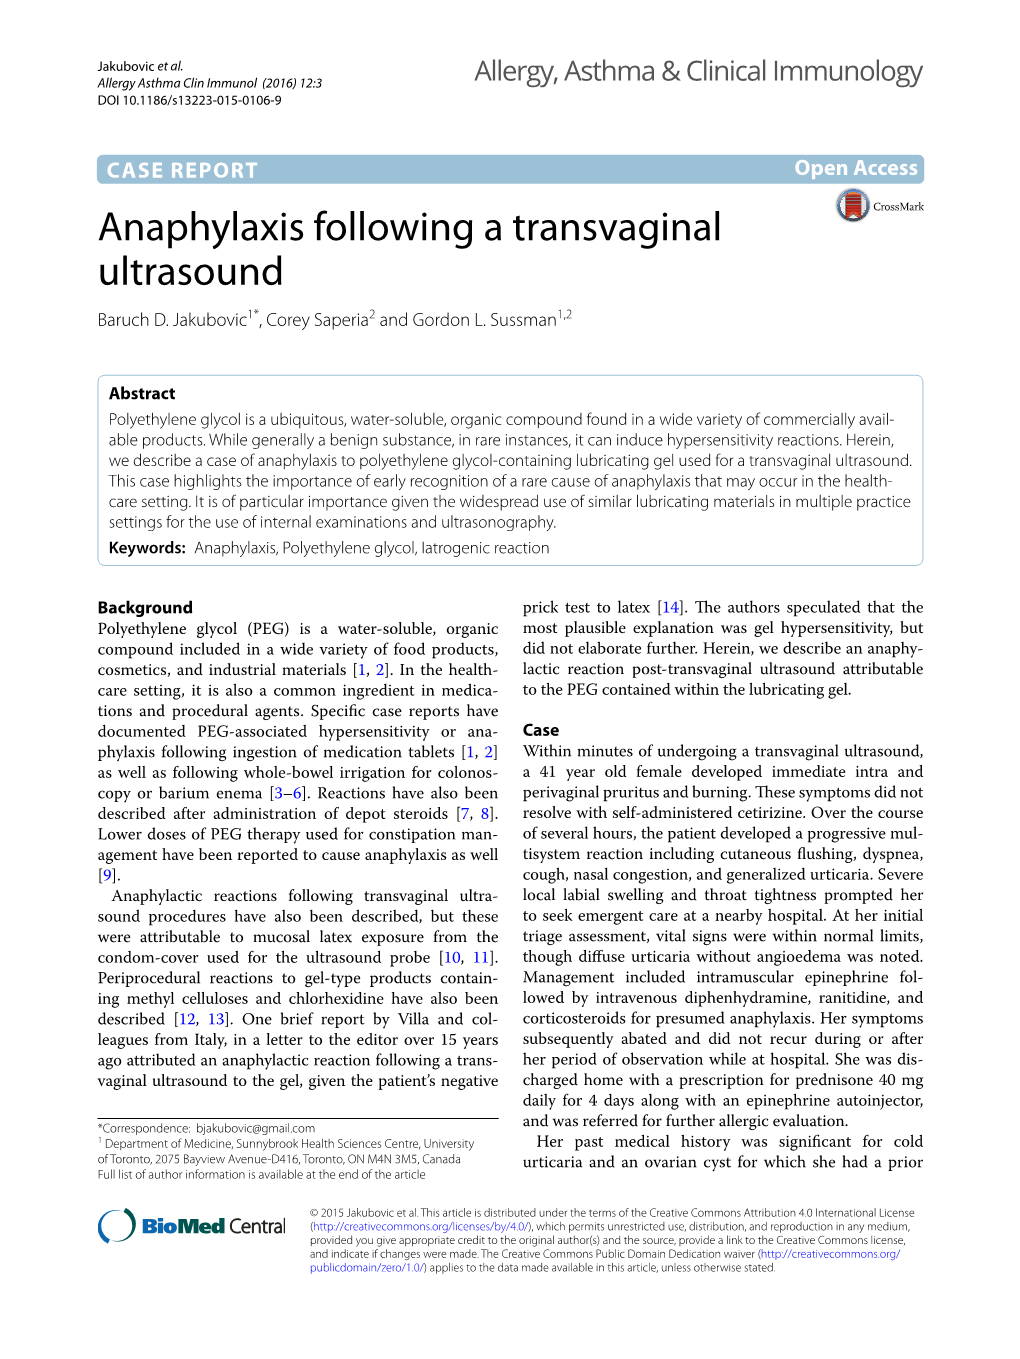 Anaphylaxis Following a Transvaginal Ultrasound Baruch D